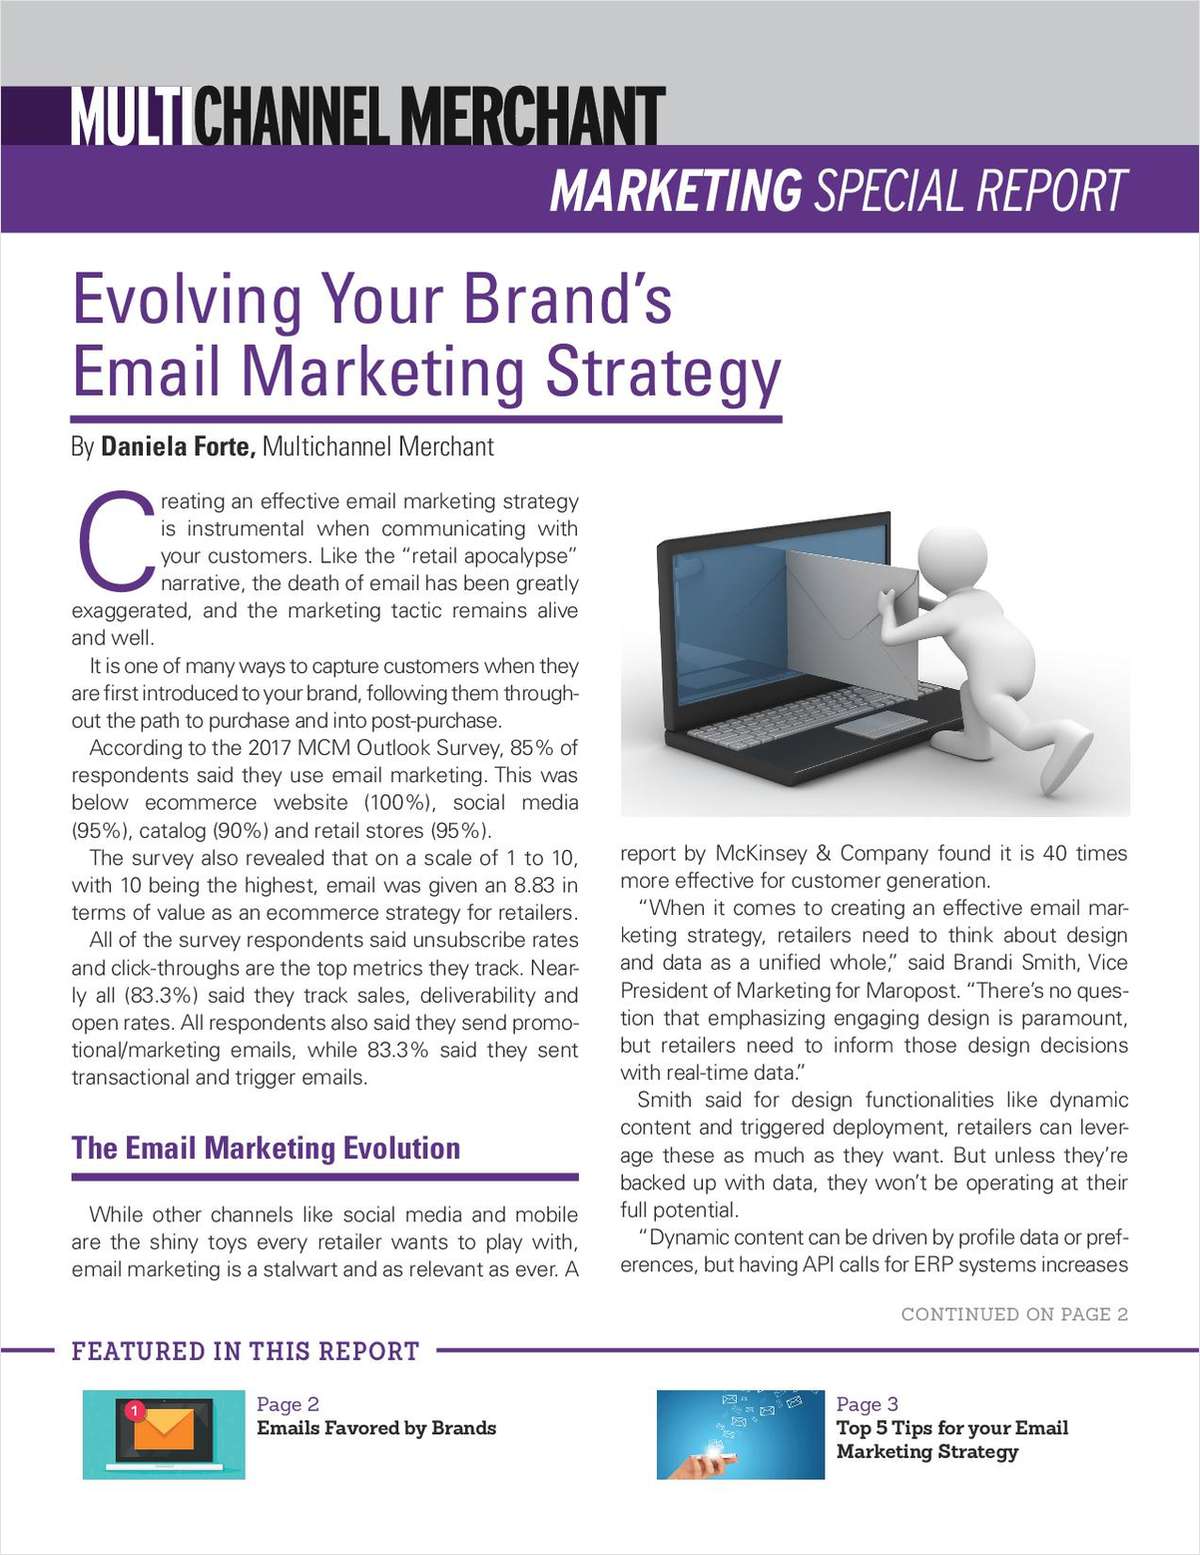 How to Evolve Your Email Marketing Strategy